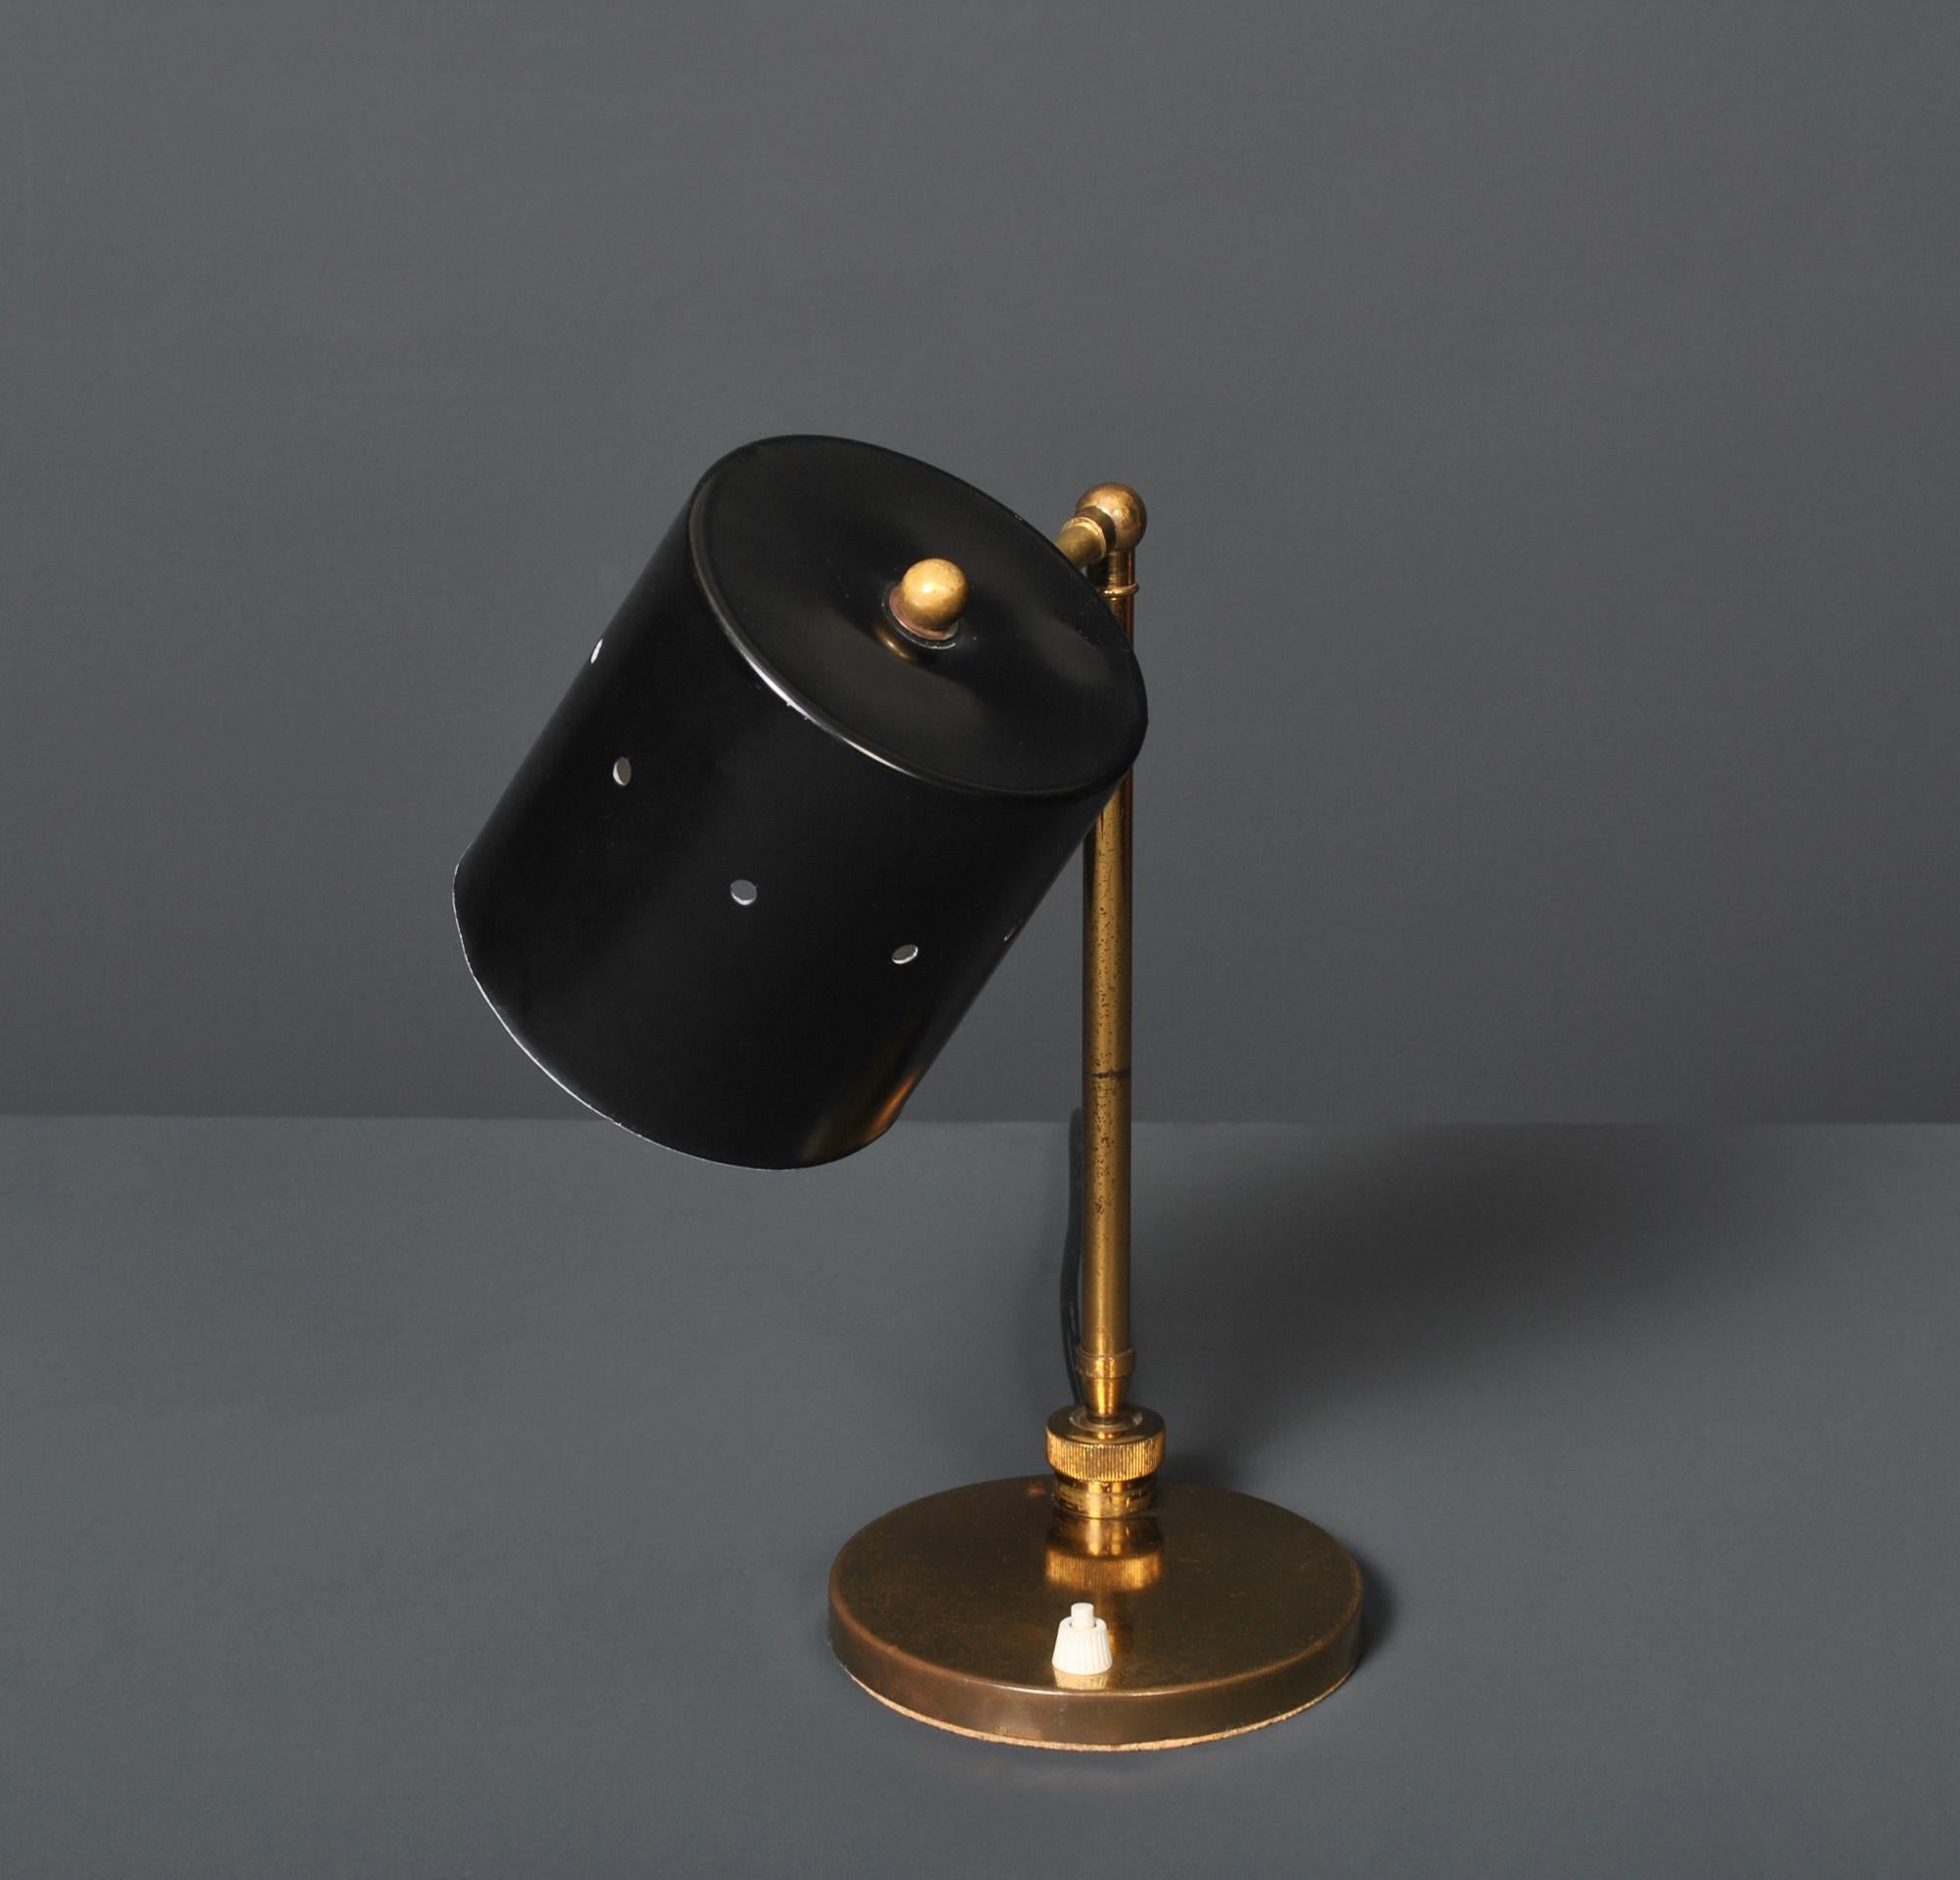 A characterful midcentury Italian desk or table lamp. Brass with black painted steel shade. Multidirectional adjustable ball and socket joint. Rewired.